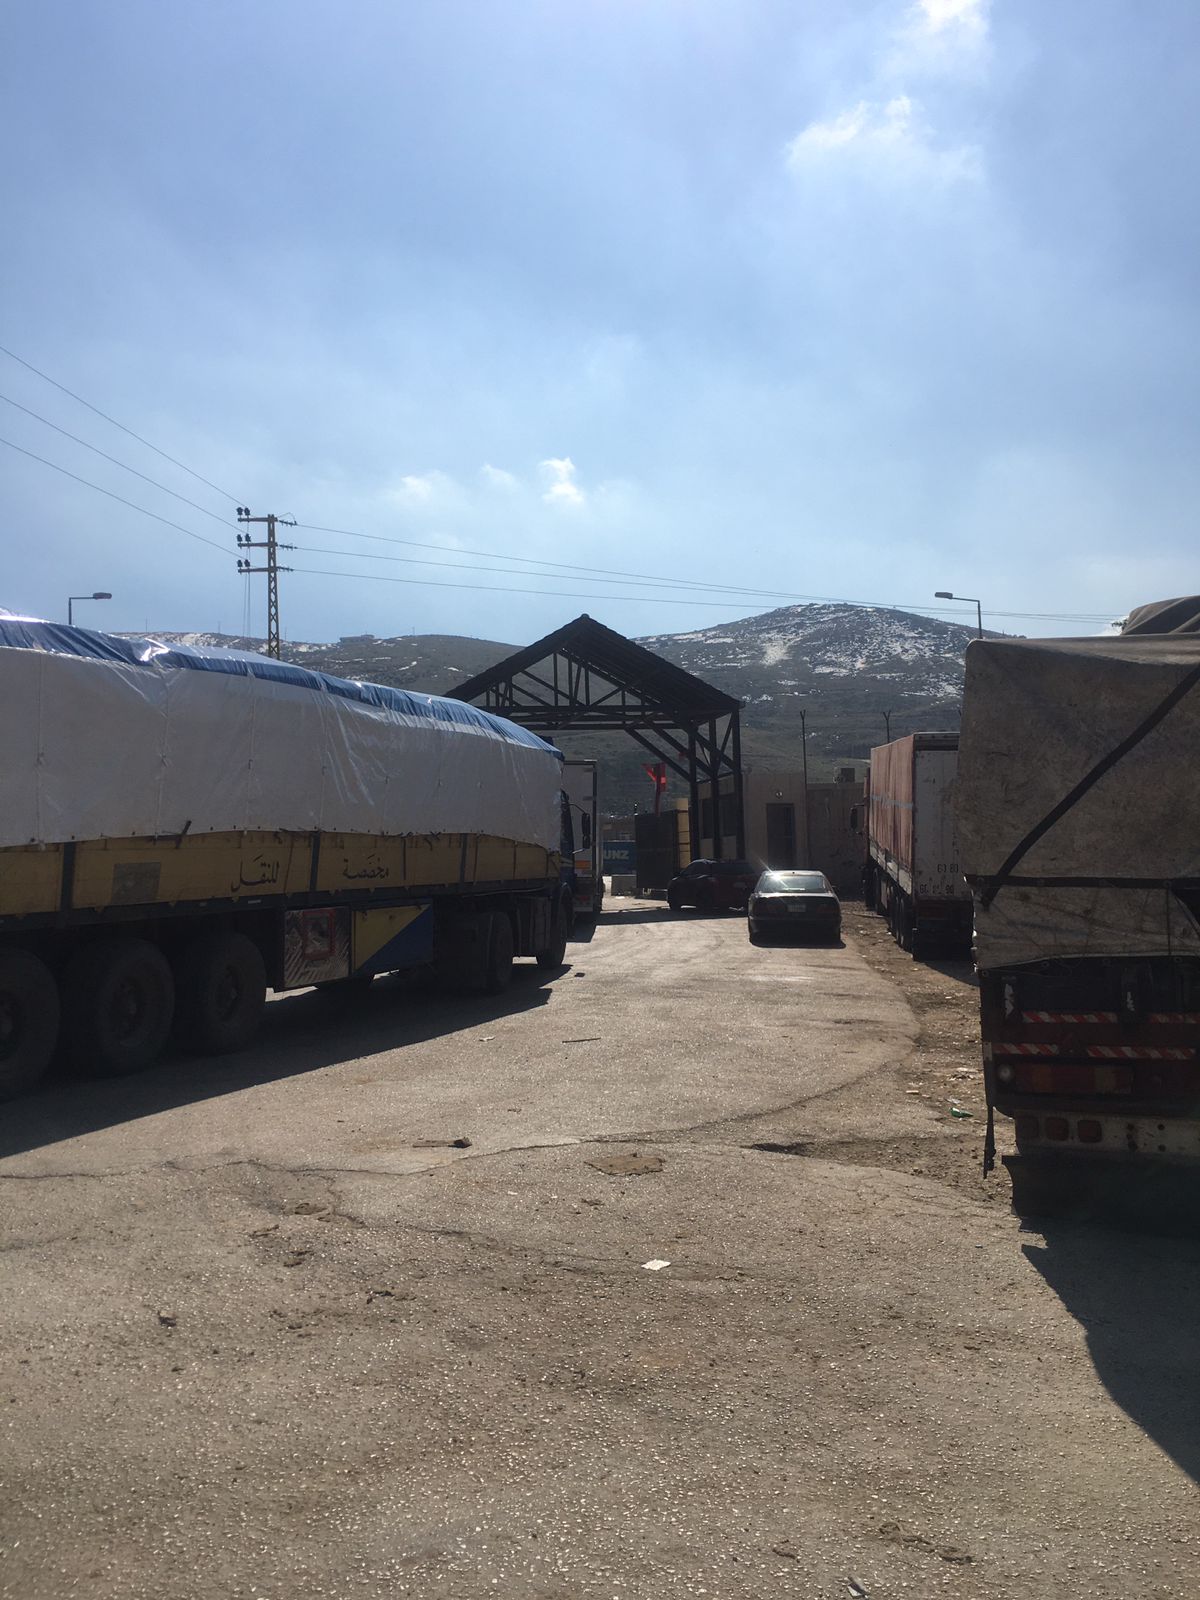 Provision of Bulgarian humanitarian aid for the injured population in Syria